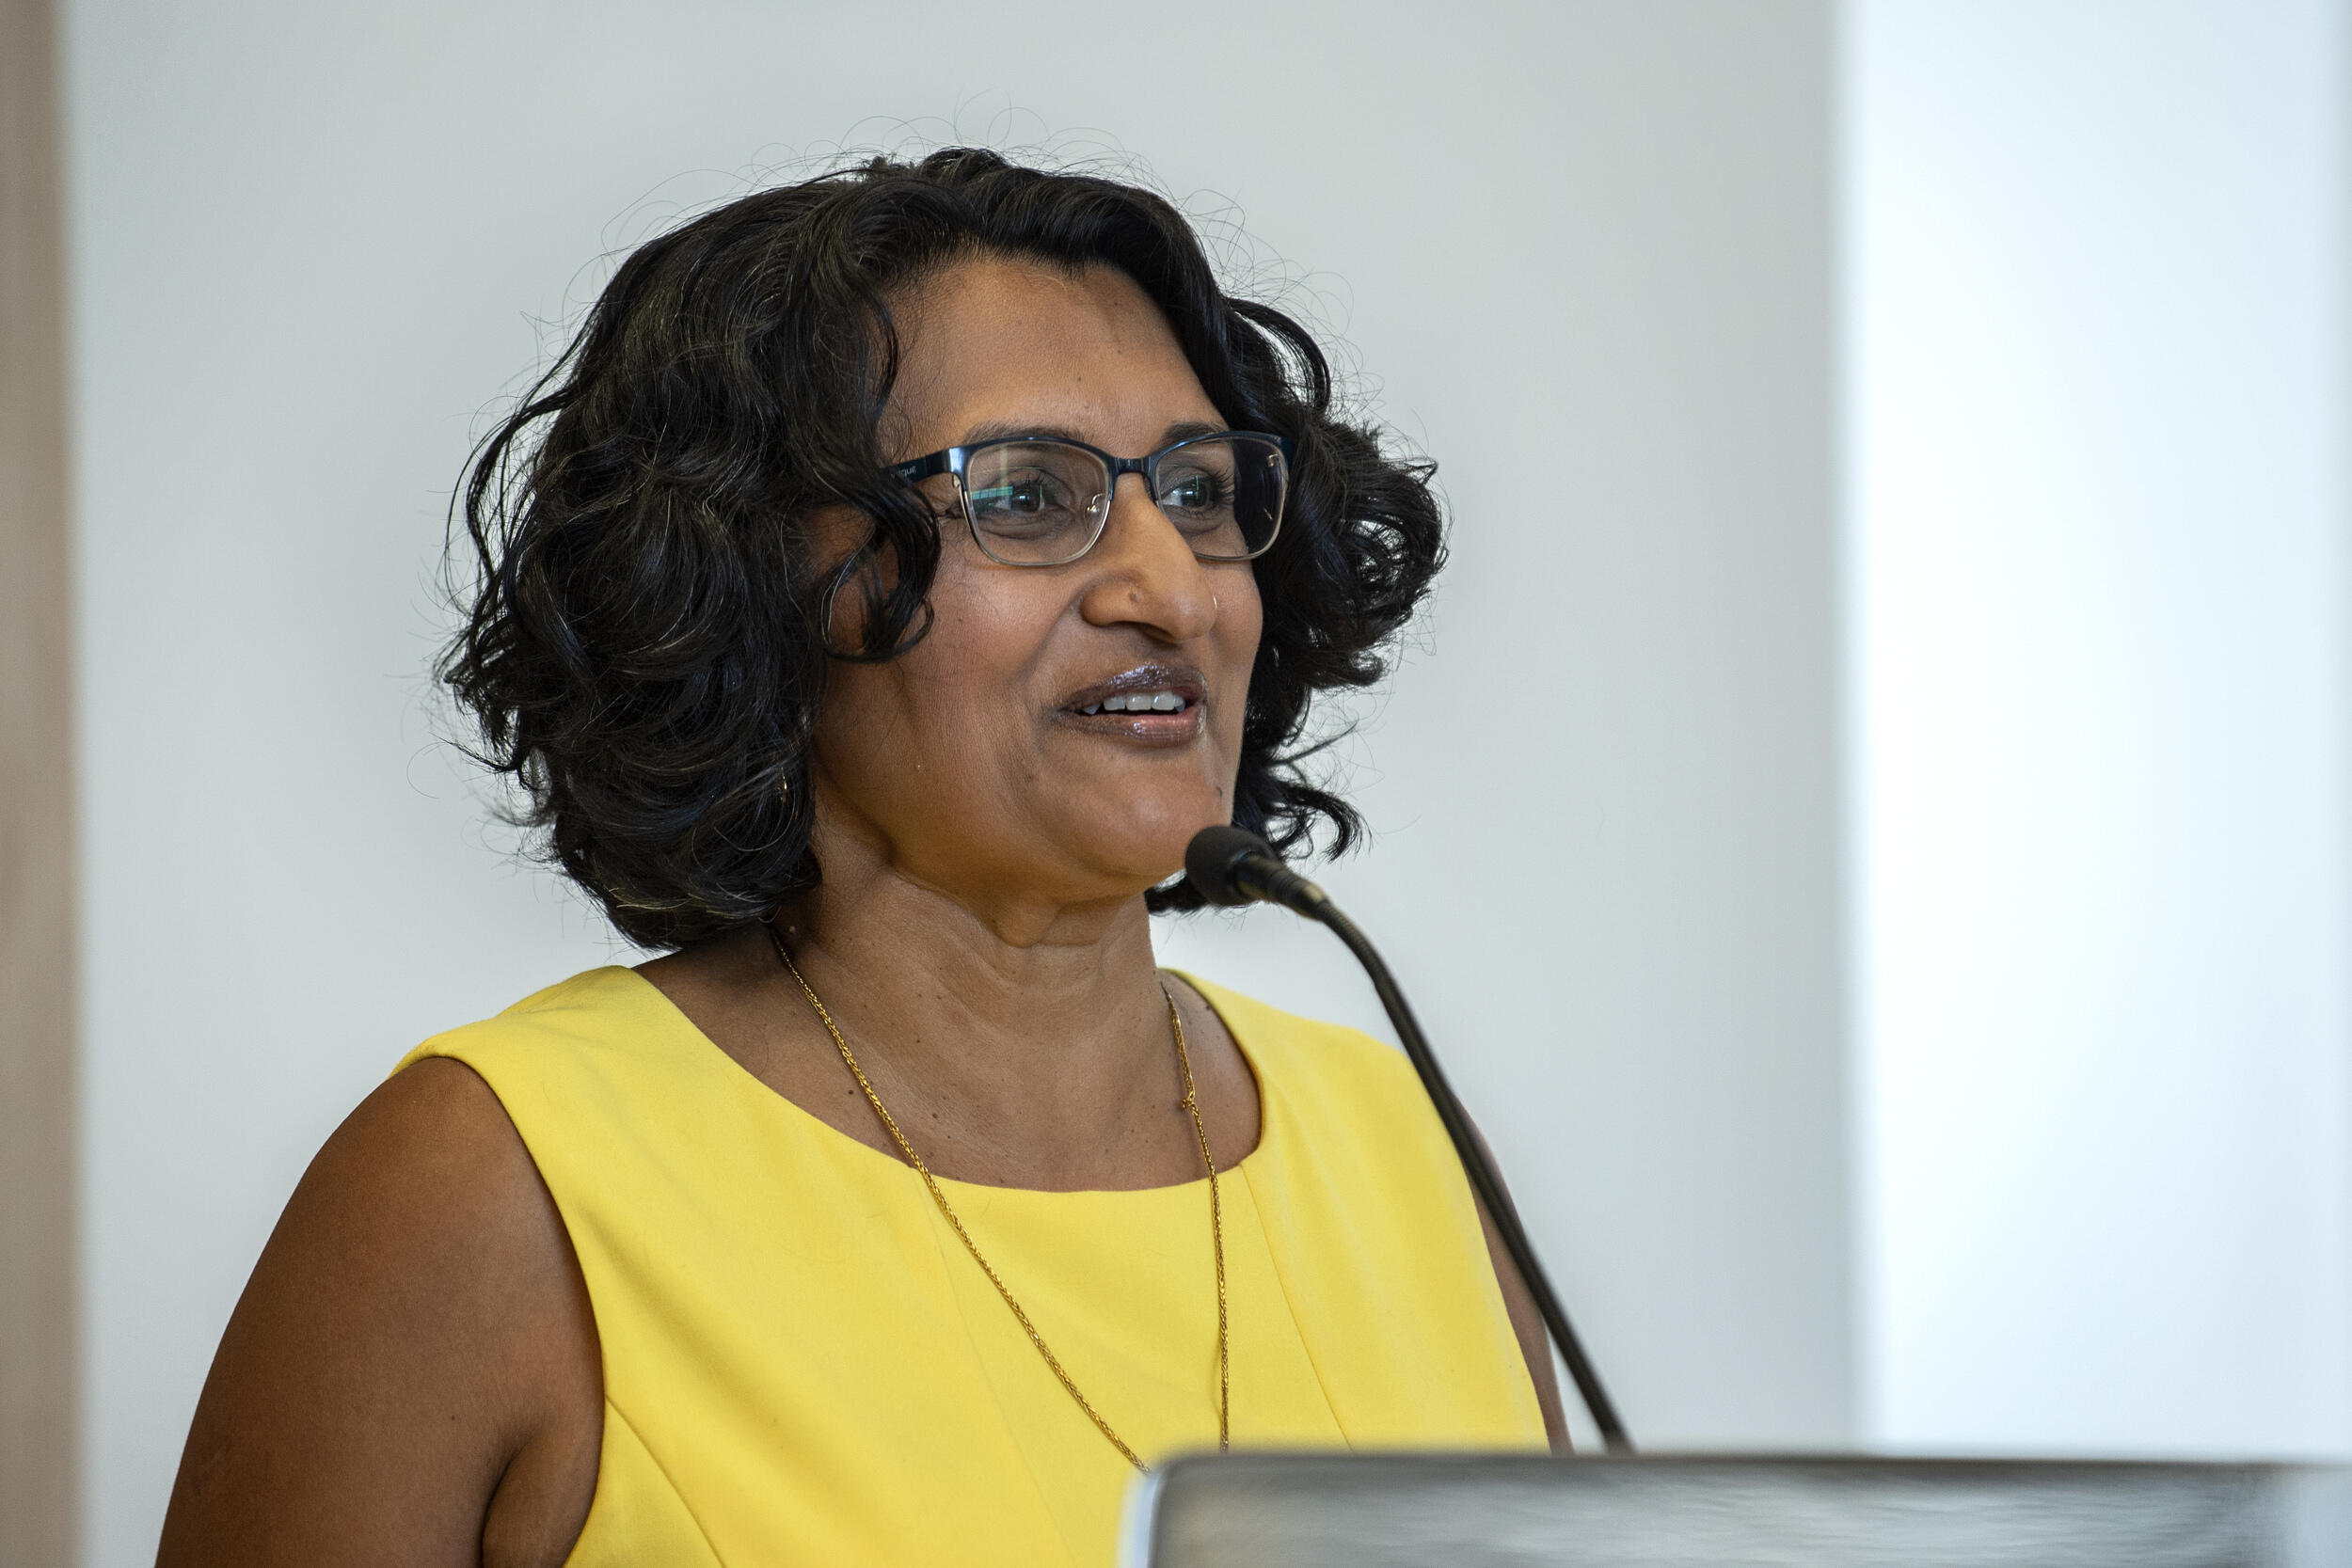 A portrait of Archana A. Pathak, Ph.D. speaking into a microphone on a podium 